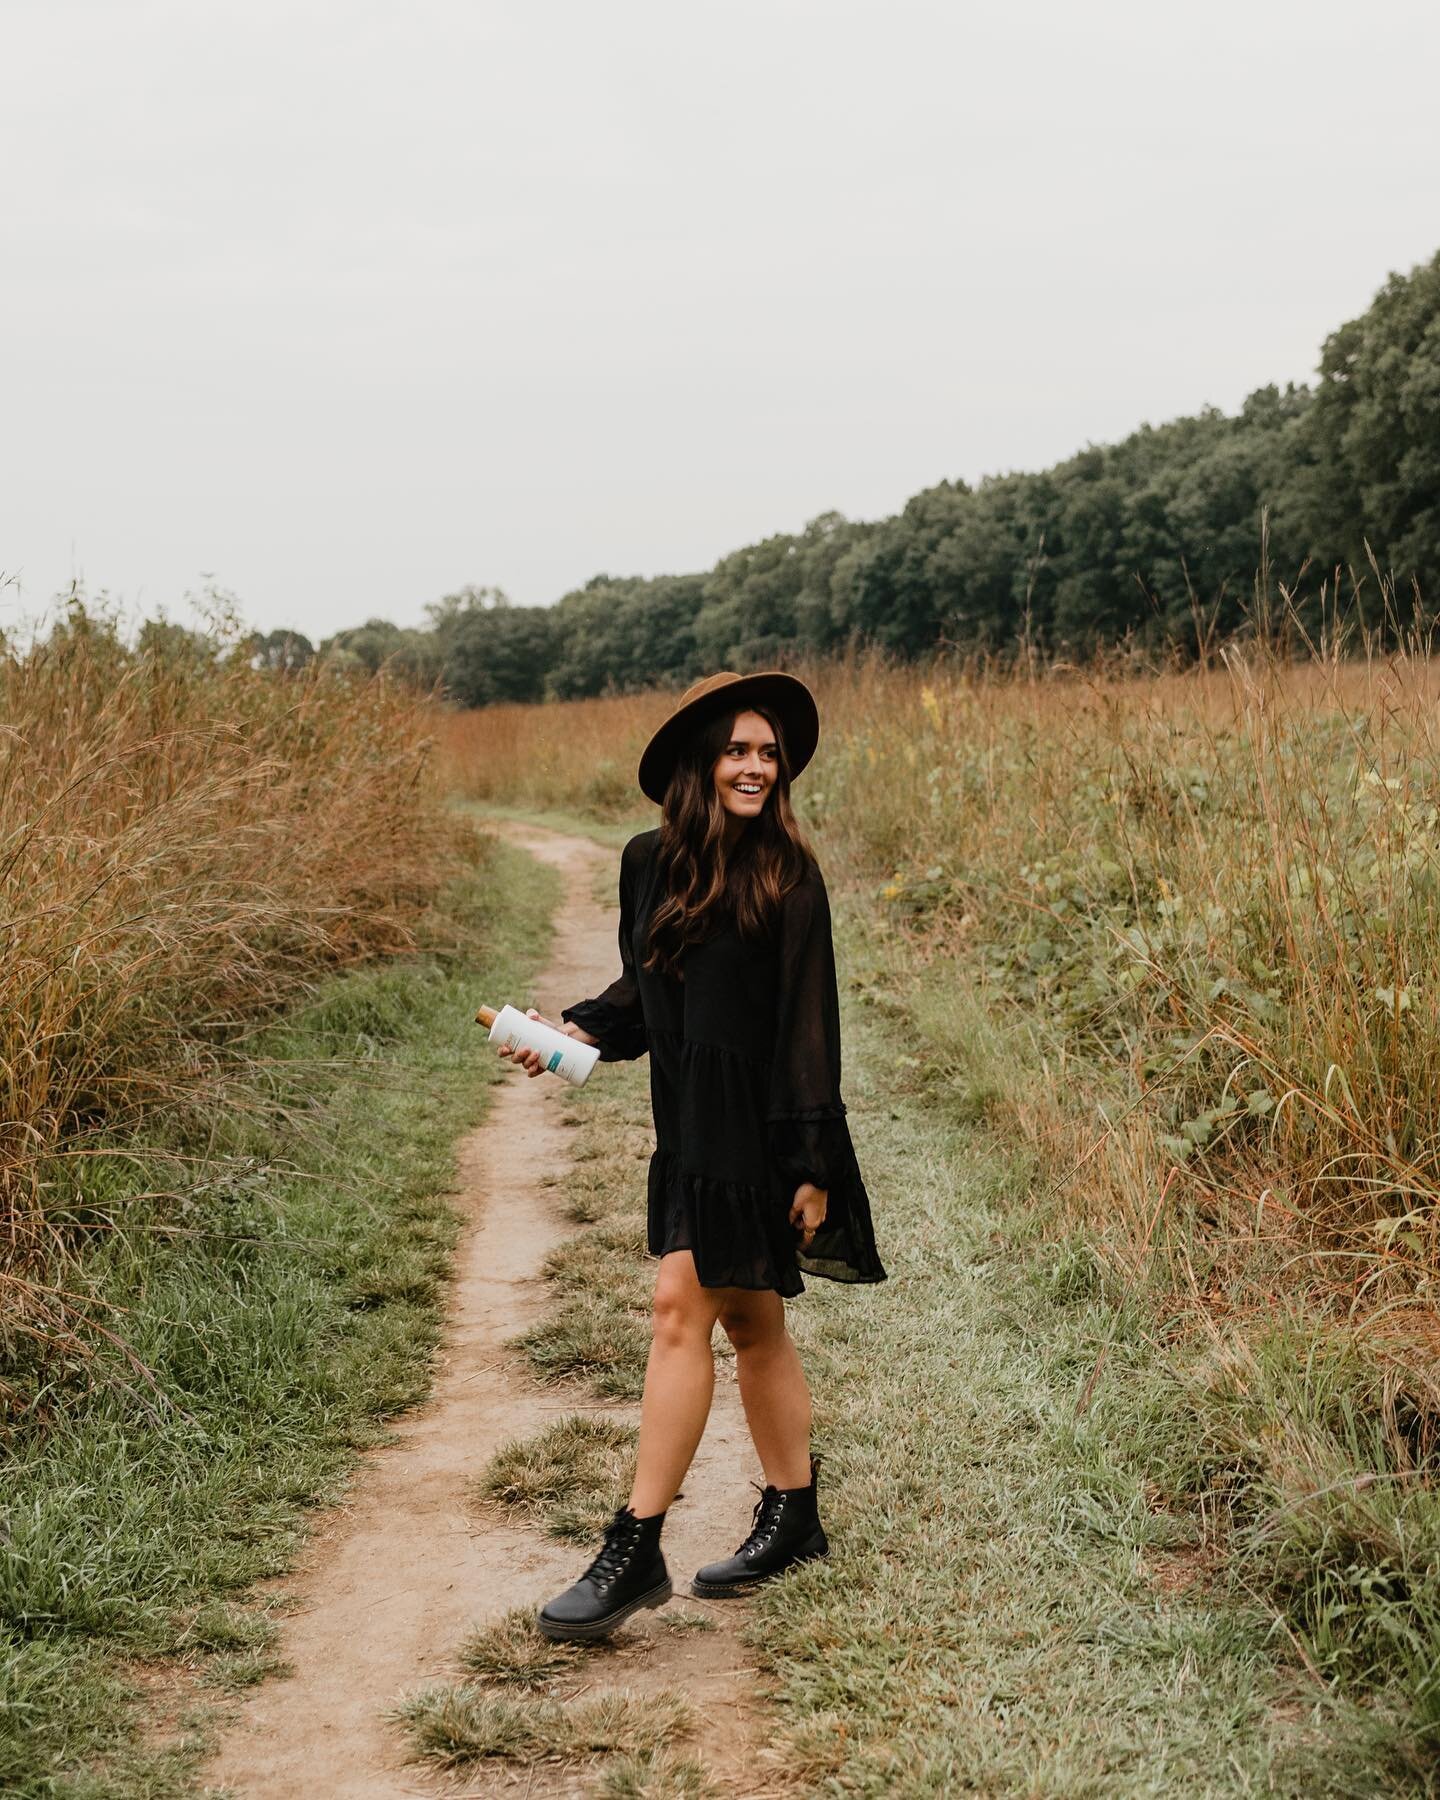 As you may have guessed, fall clothing is one of my favorite parts about the season. I love creating fun outfits and embarrassing darker tones as the days get shorter. I also enjoy taking my self-care time a bit slower in the fall to wind down in the